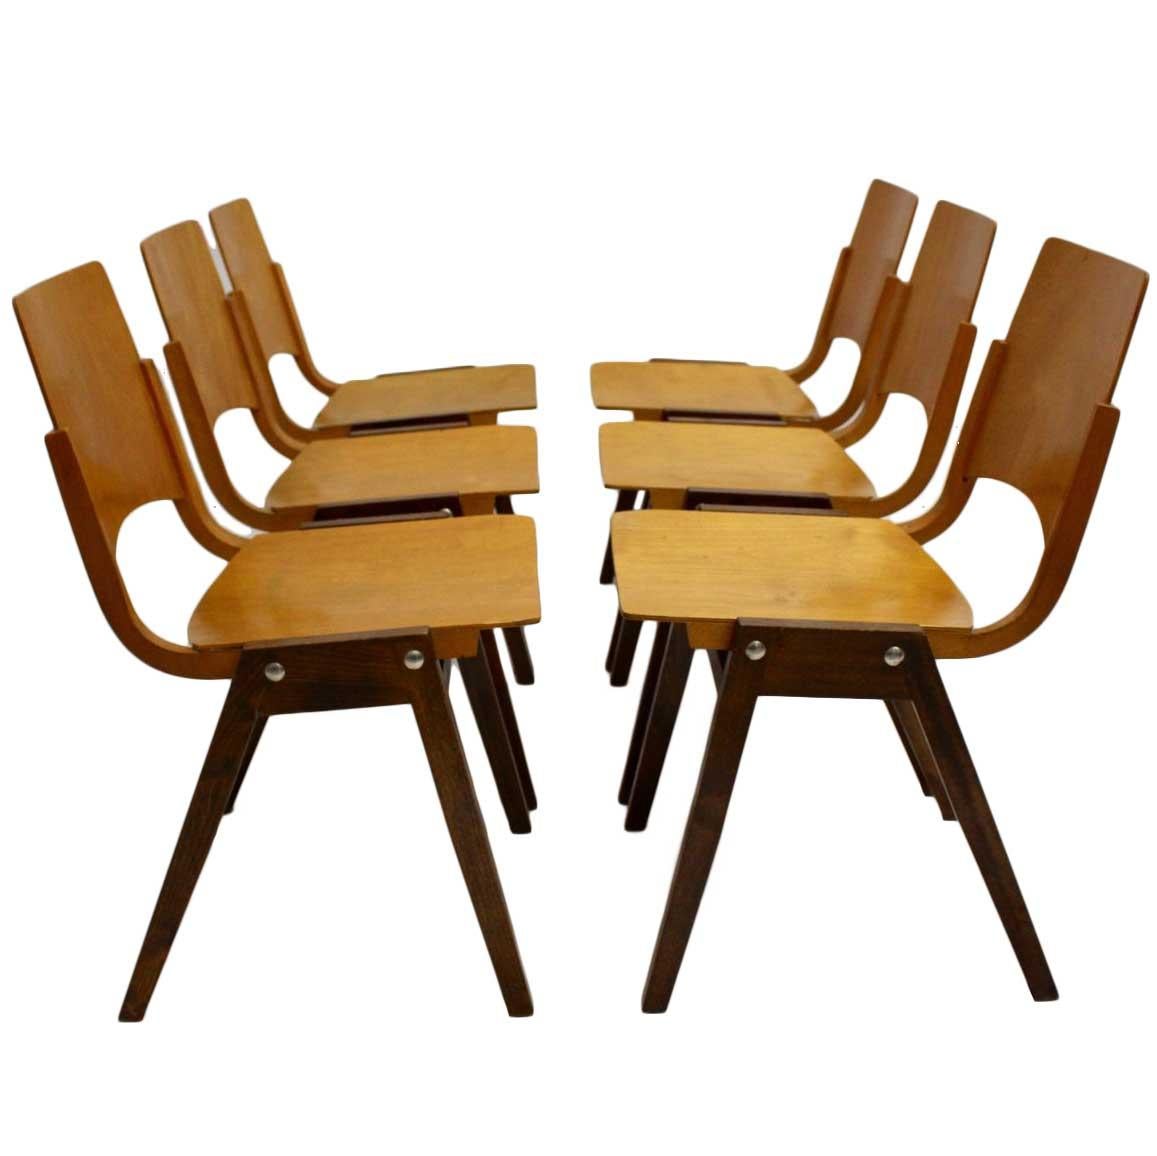 Mid-Century Modern Beech Bicolor Dining Room Chairs Roland Rainer Austria 1952 For Sale